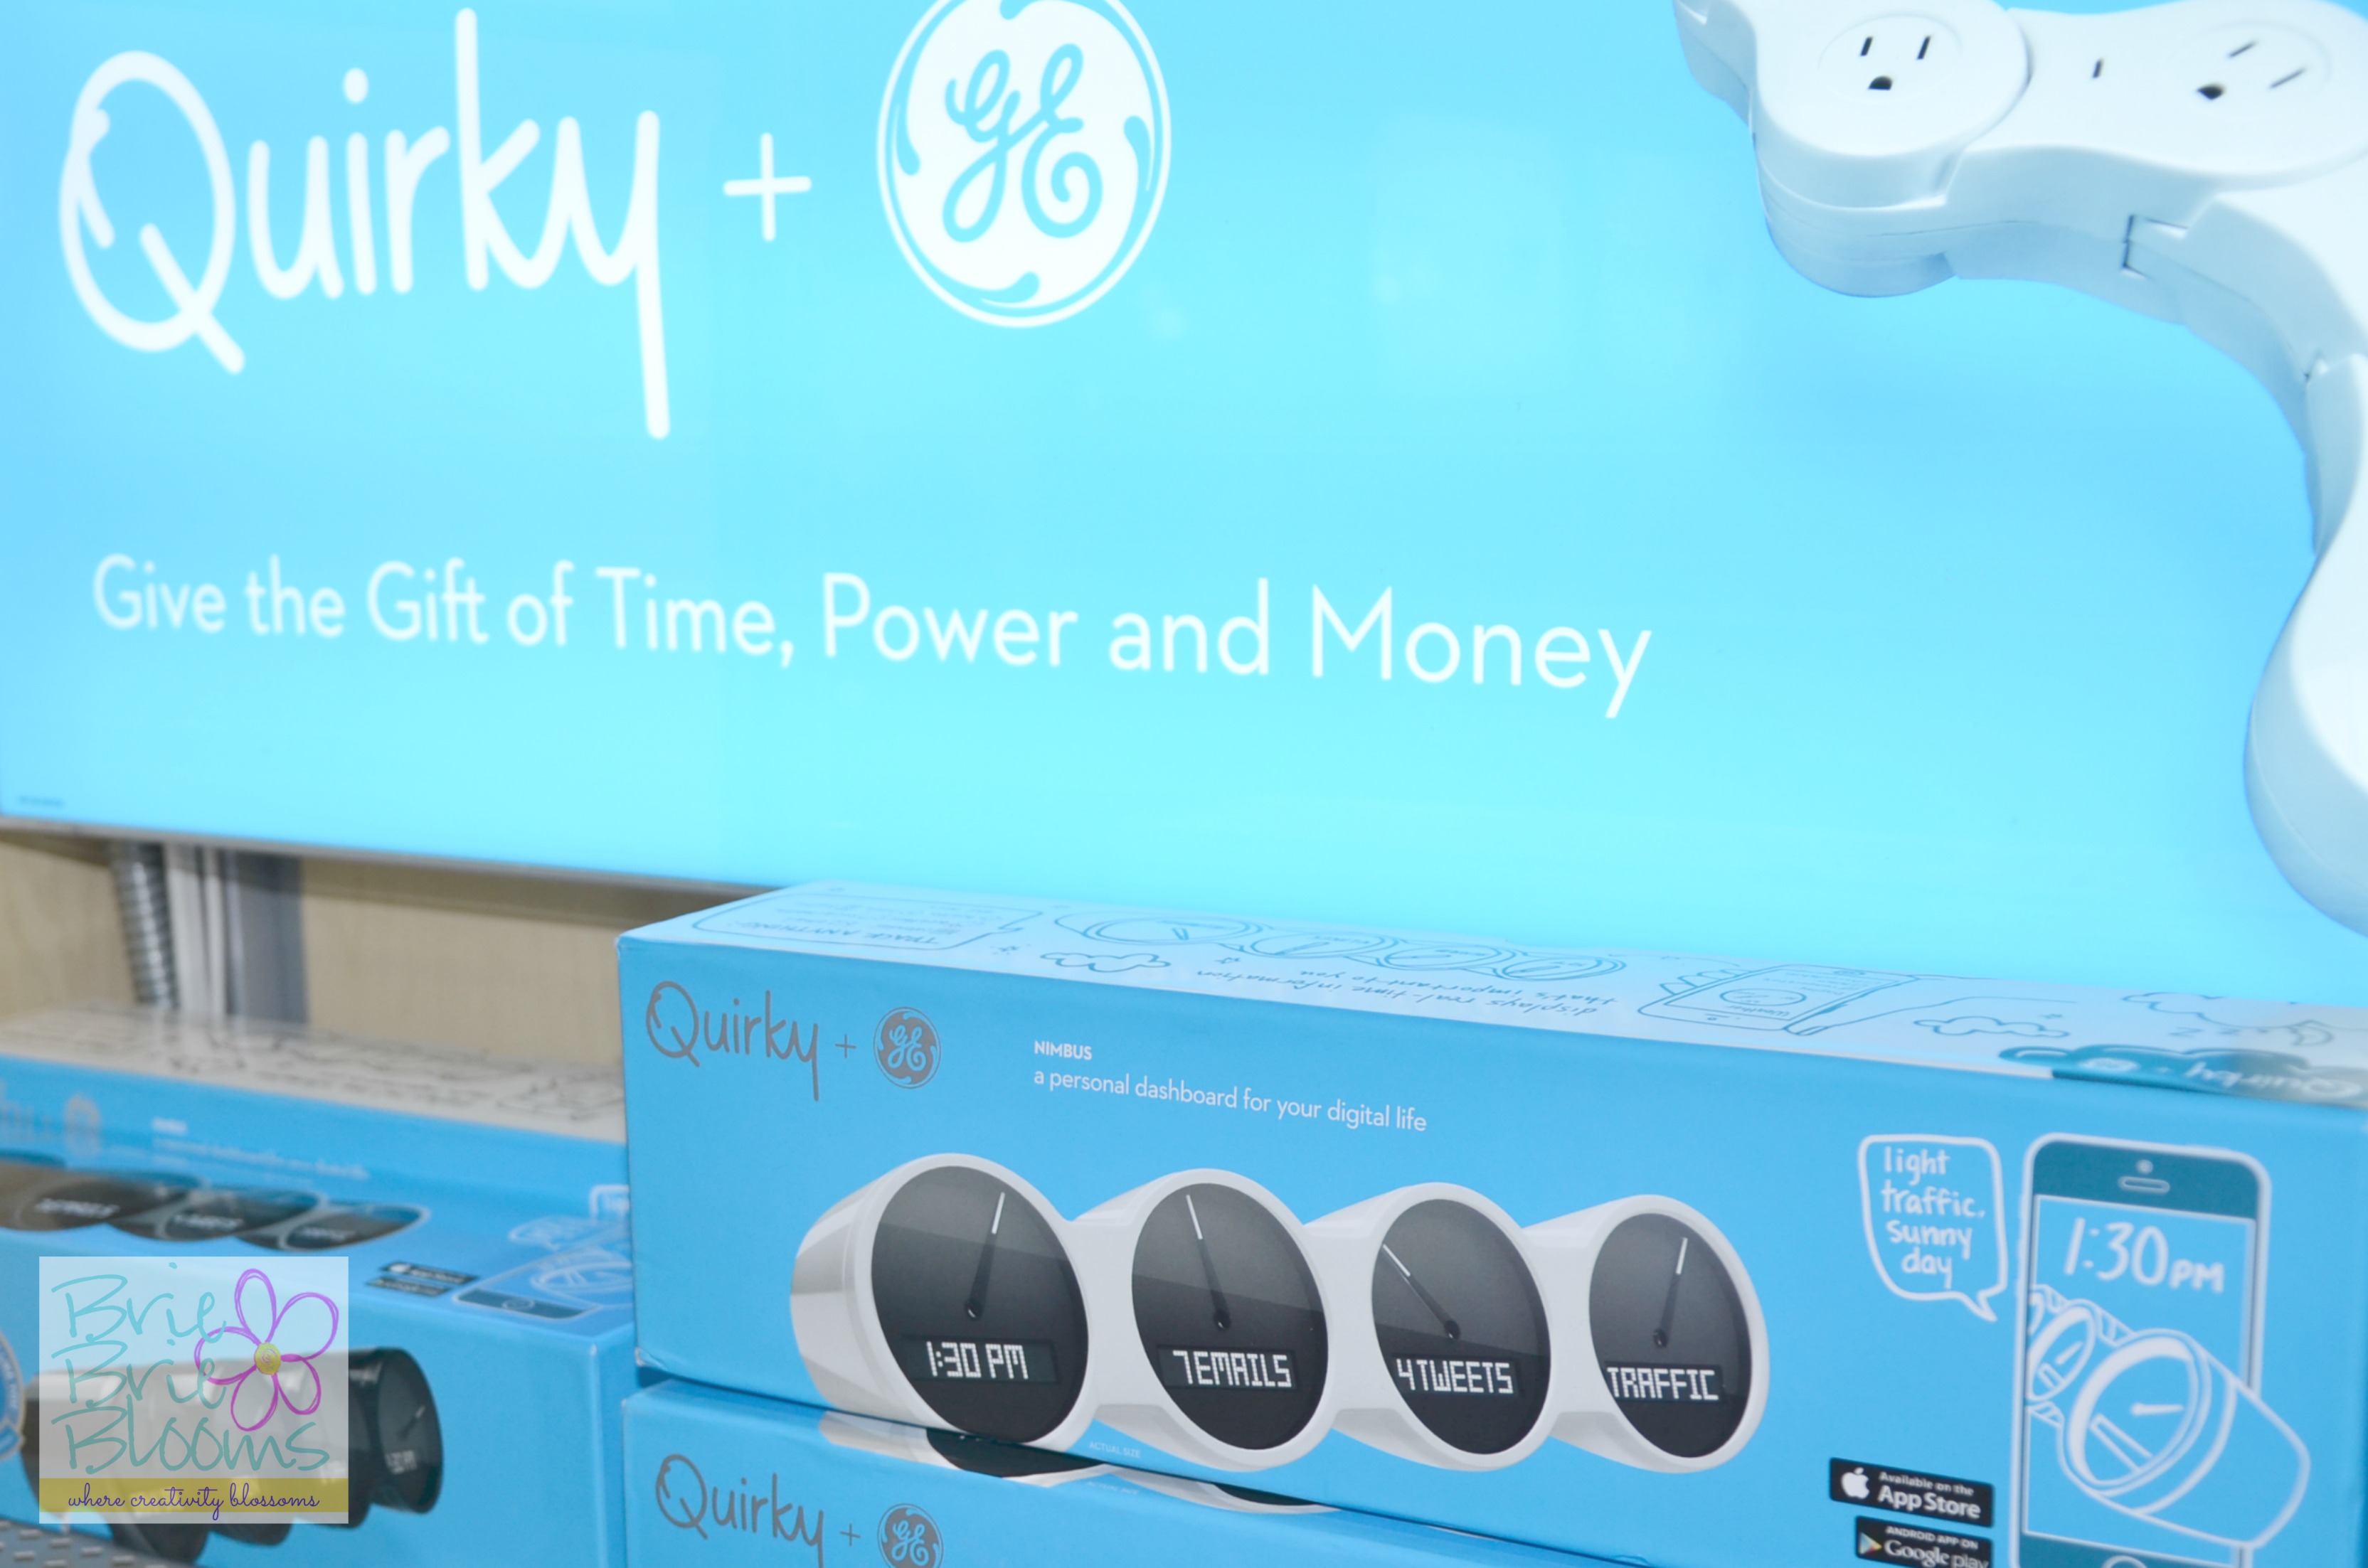 Gift ideas for the hard to shop for man, Quirky GE products #OneBuyForAll #shop #cbias